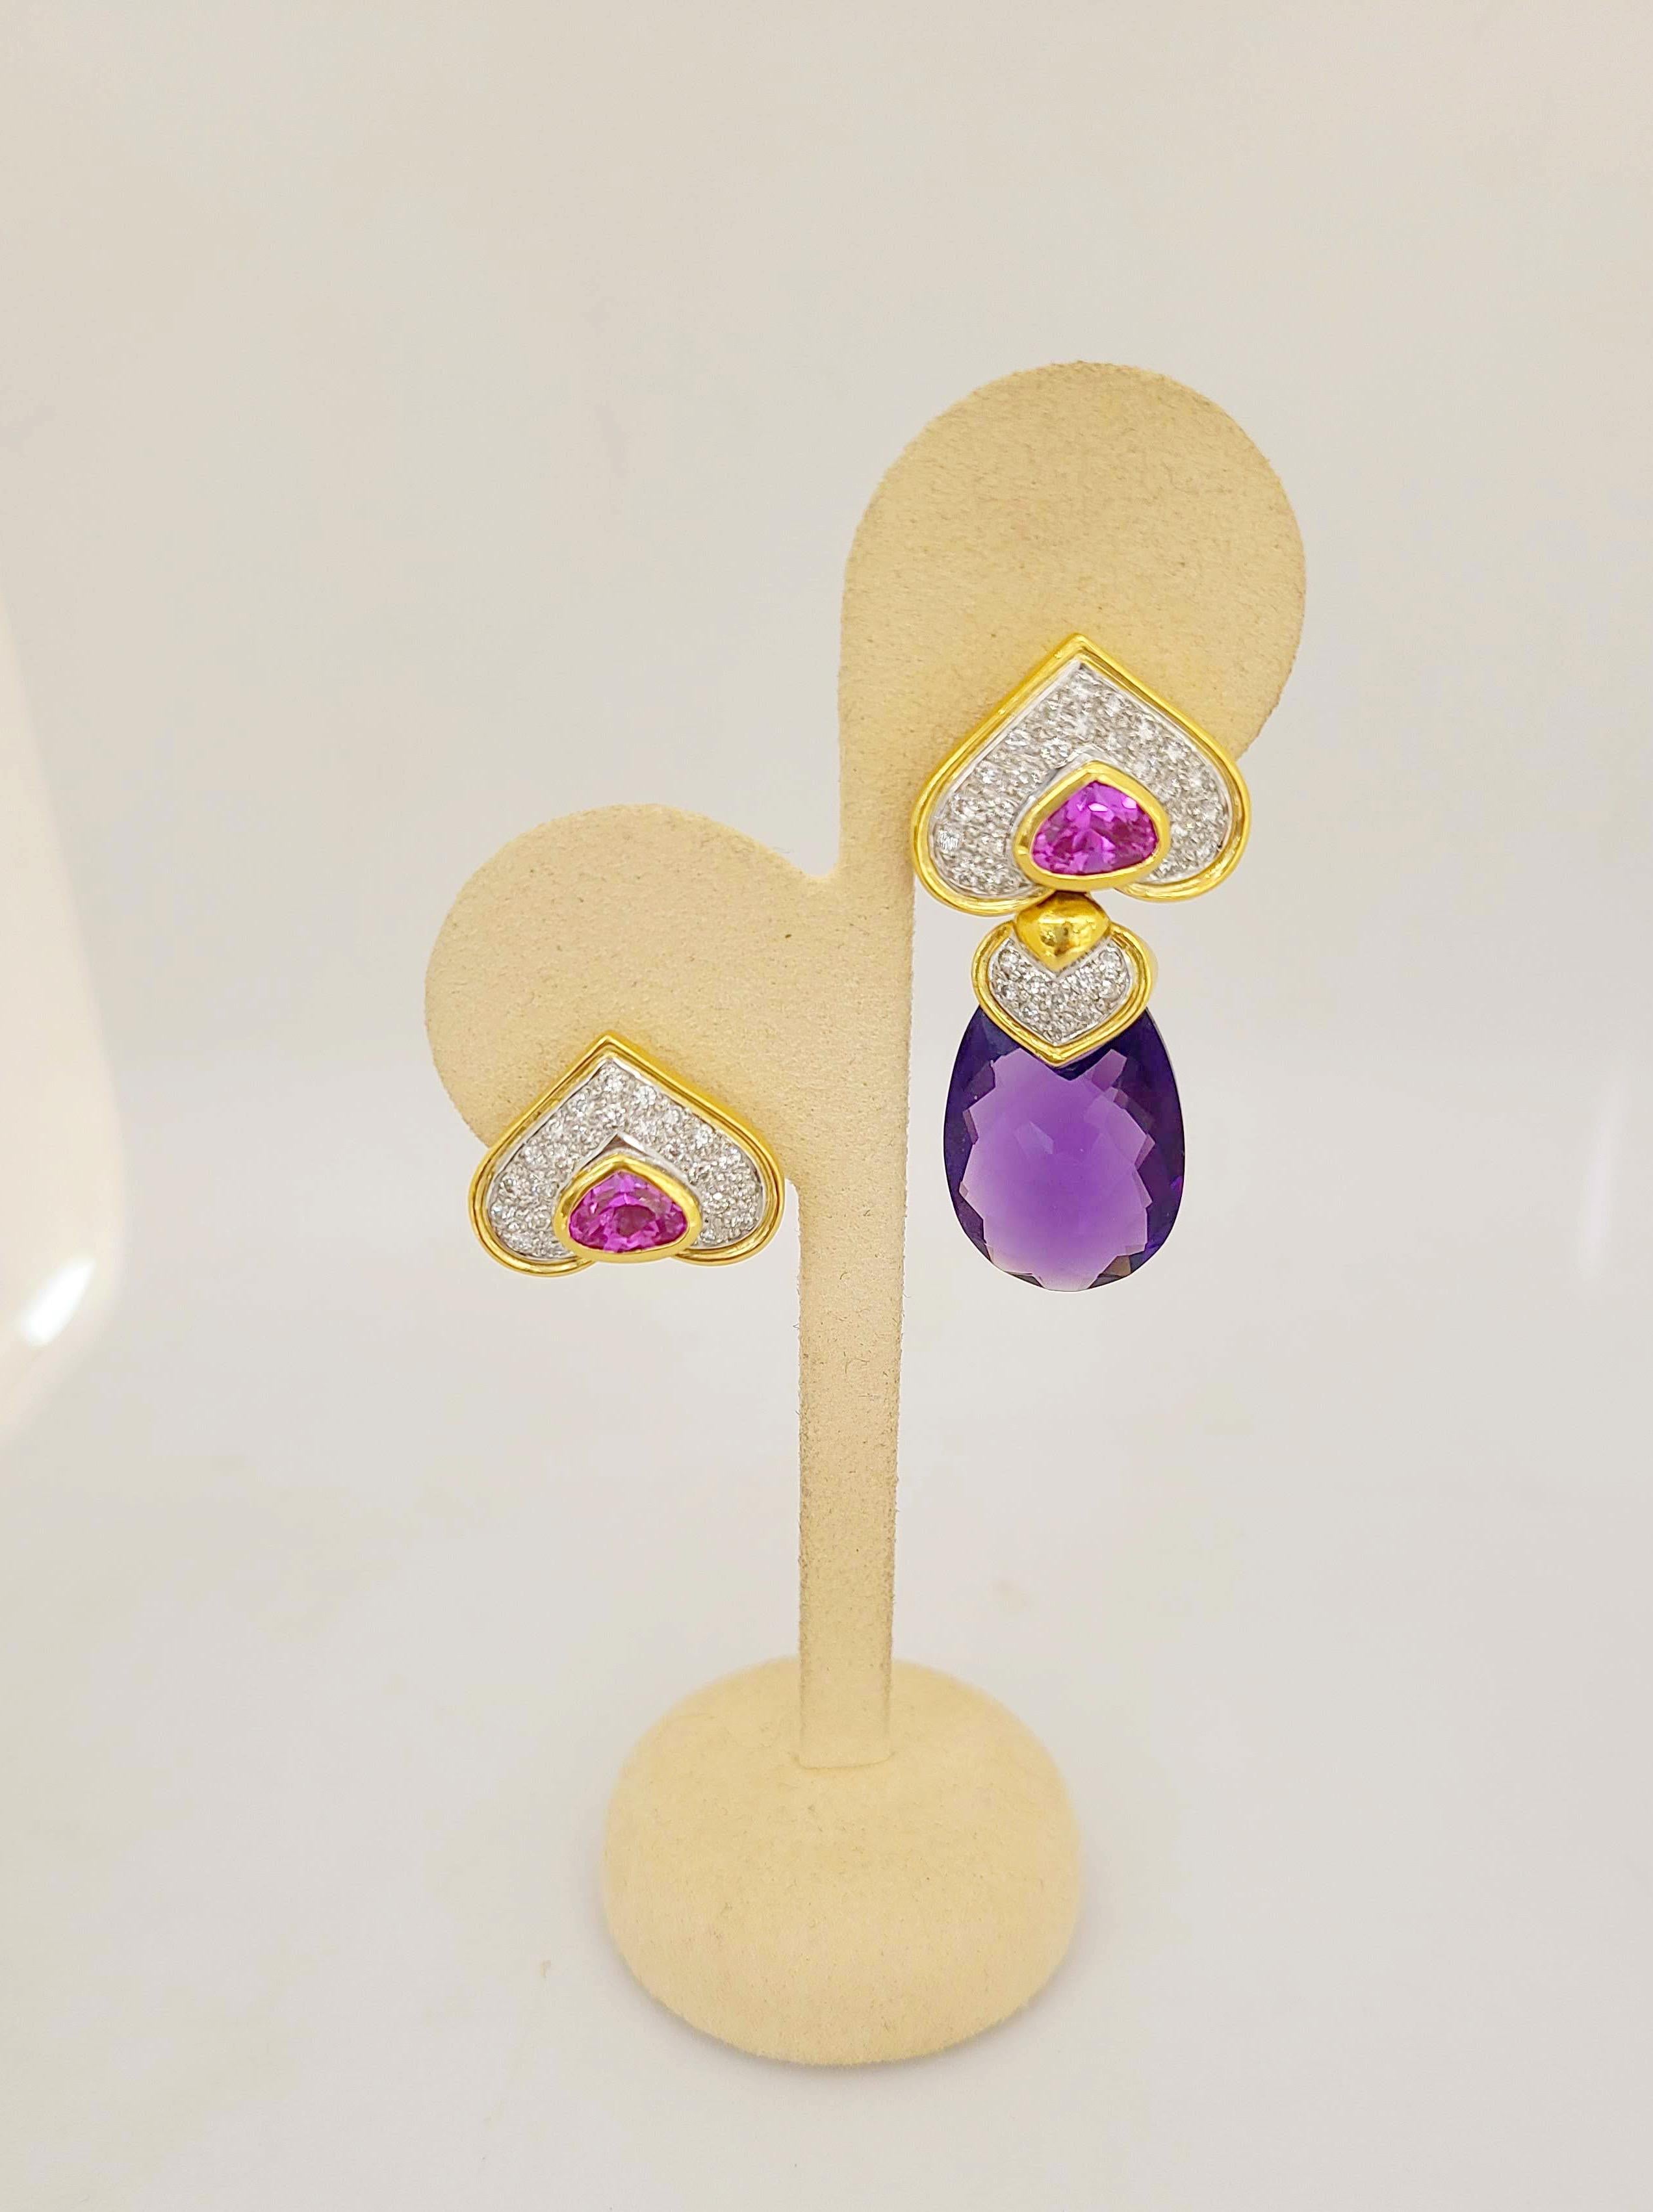 These earrings are designed with 18 karat yellow gold heart shapes that have been pave set with diamonds. A single heart shaped bezel set pink tourmaline is in the center of each heart. A detachable diamond capped amethyst drop hangs from the gold